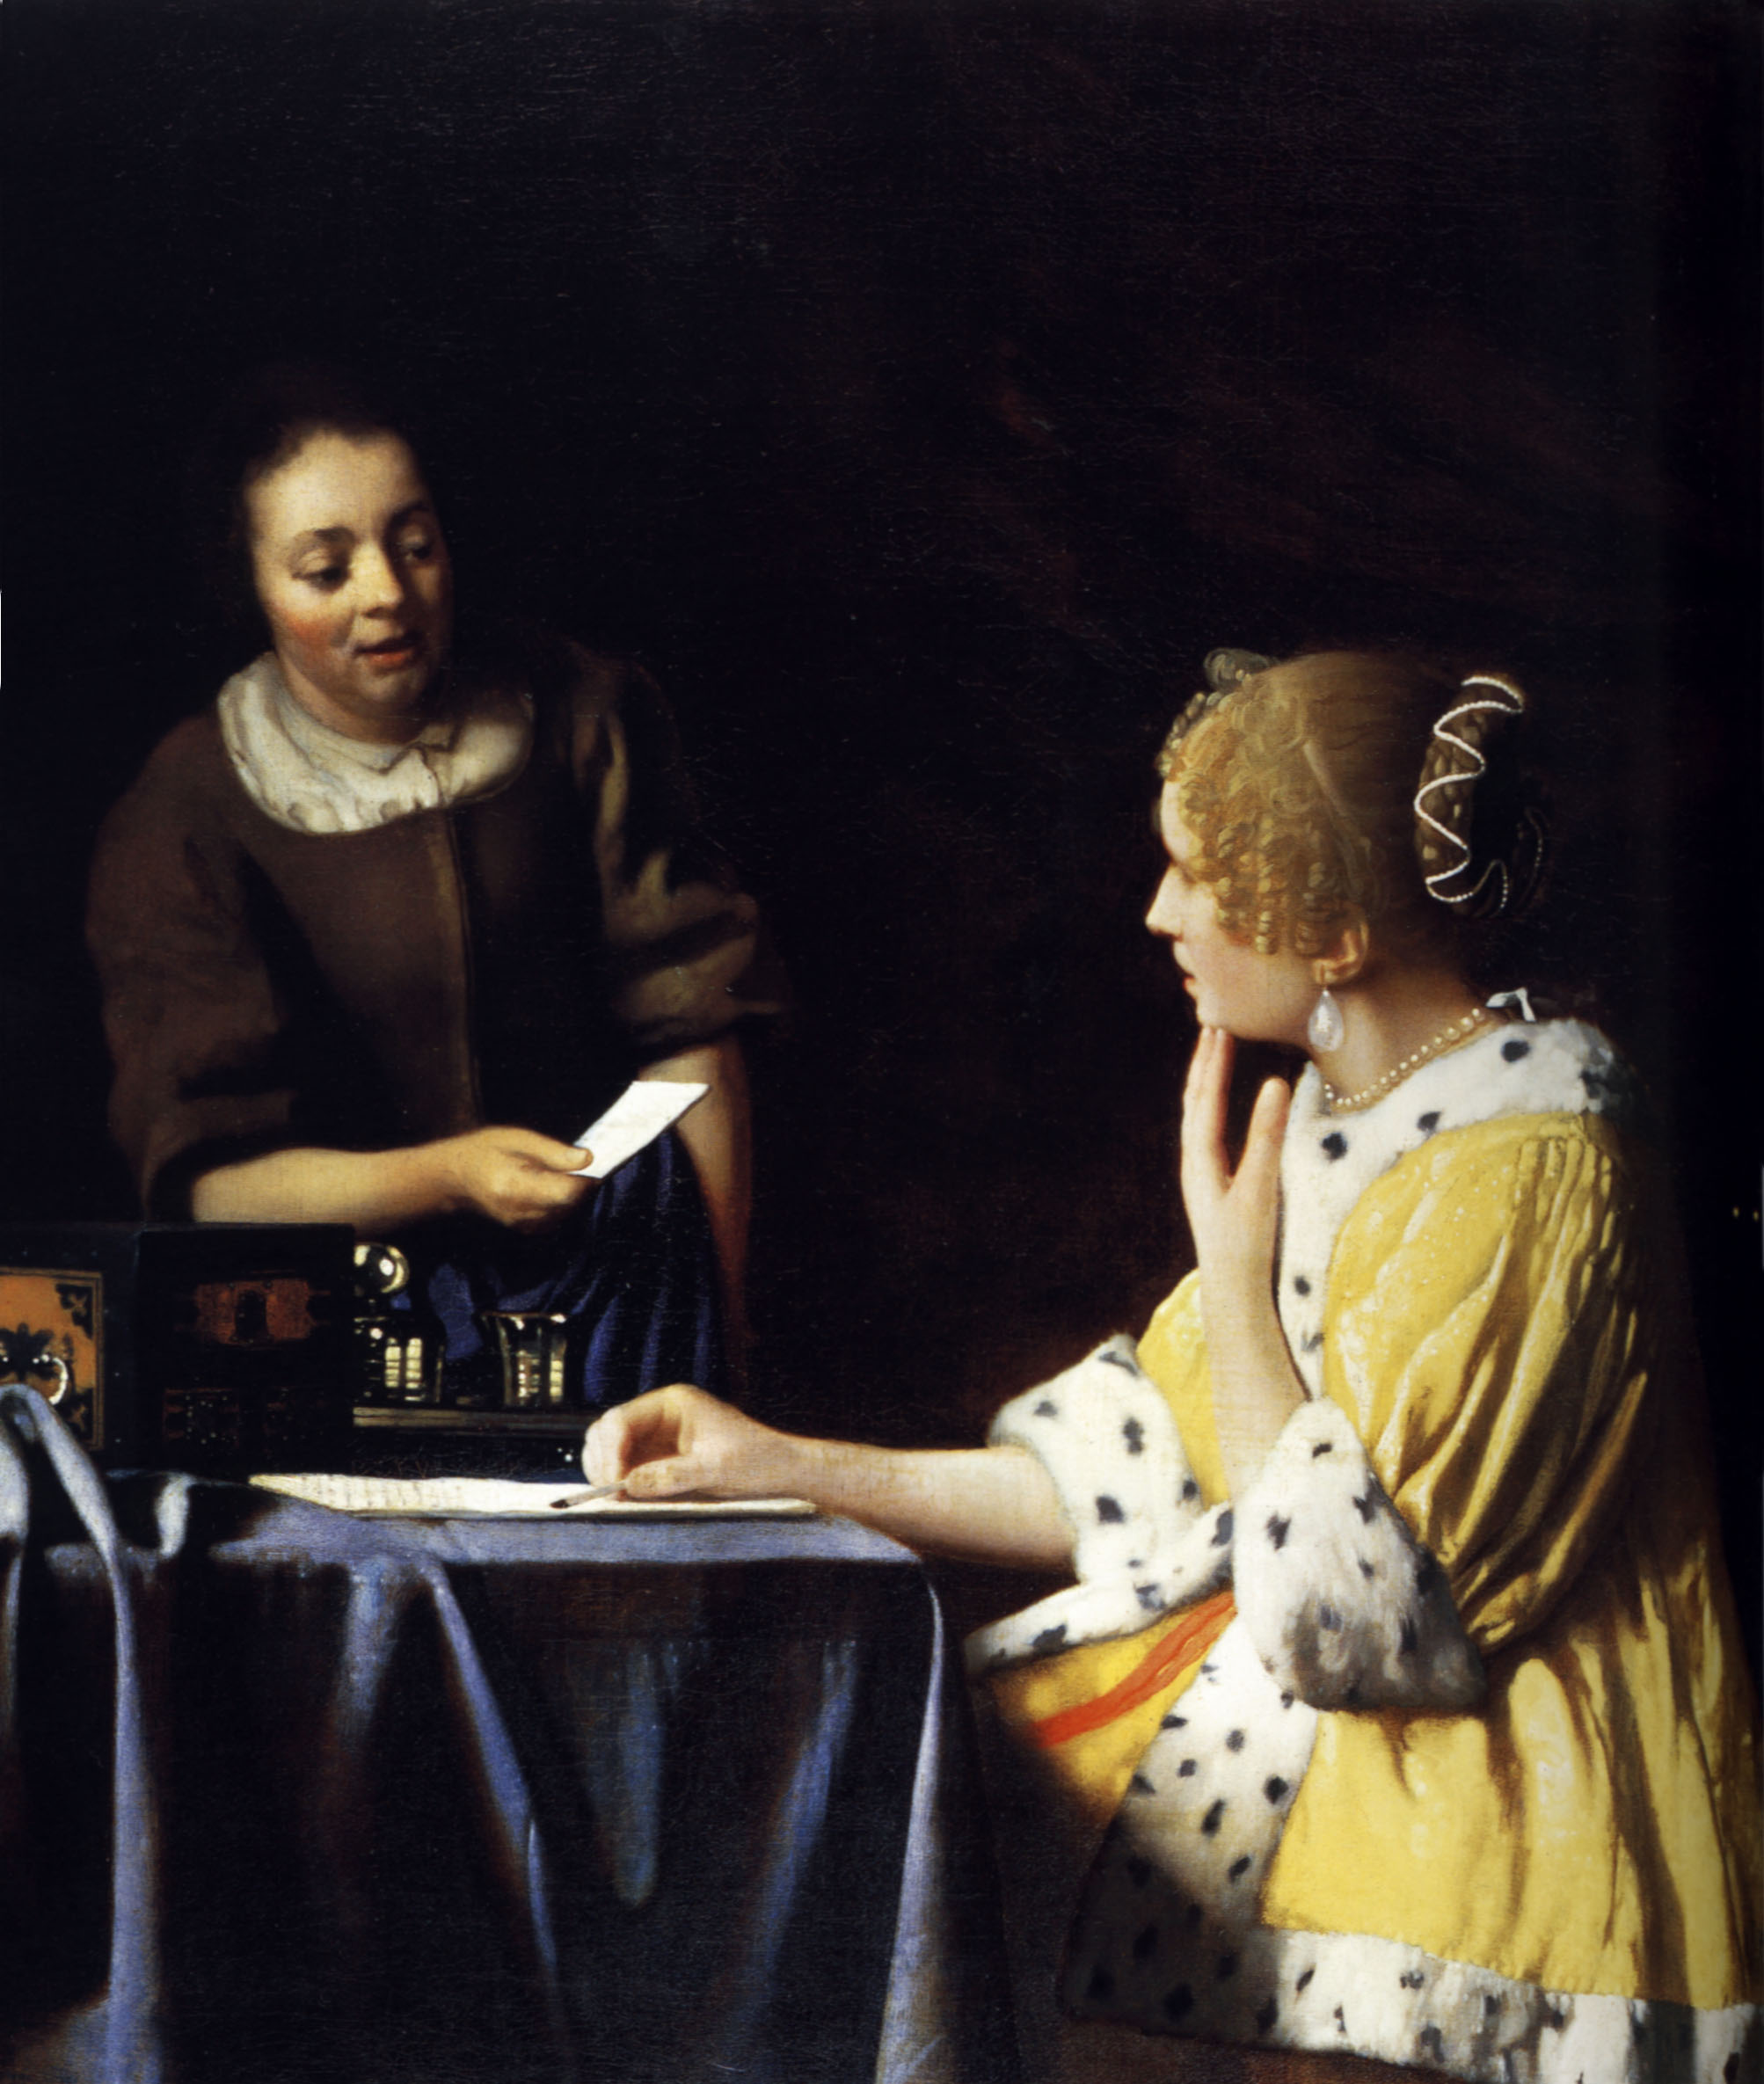 the frick collection includes vermeer's 1677 mistress and maid painting